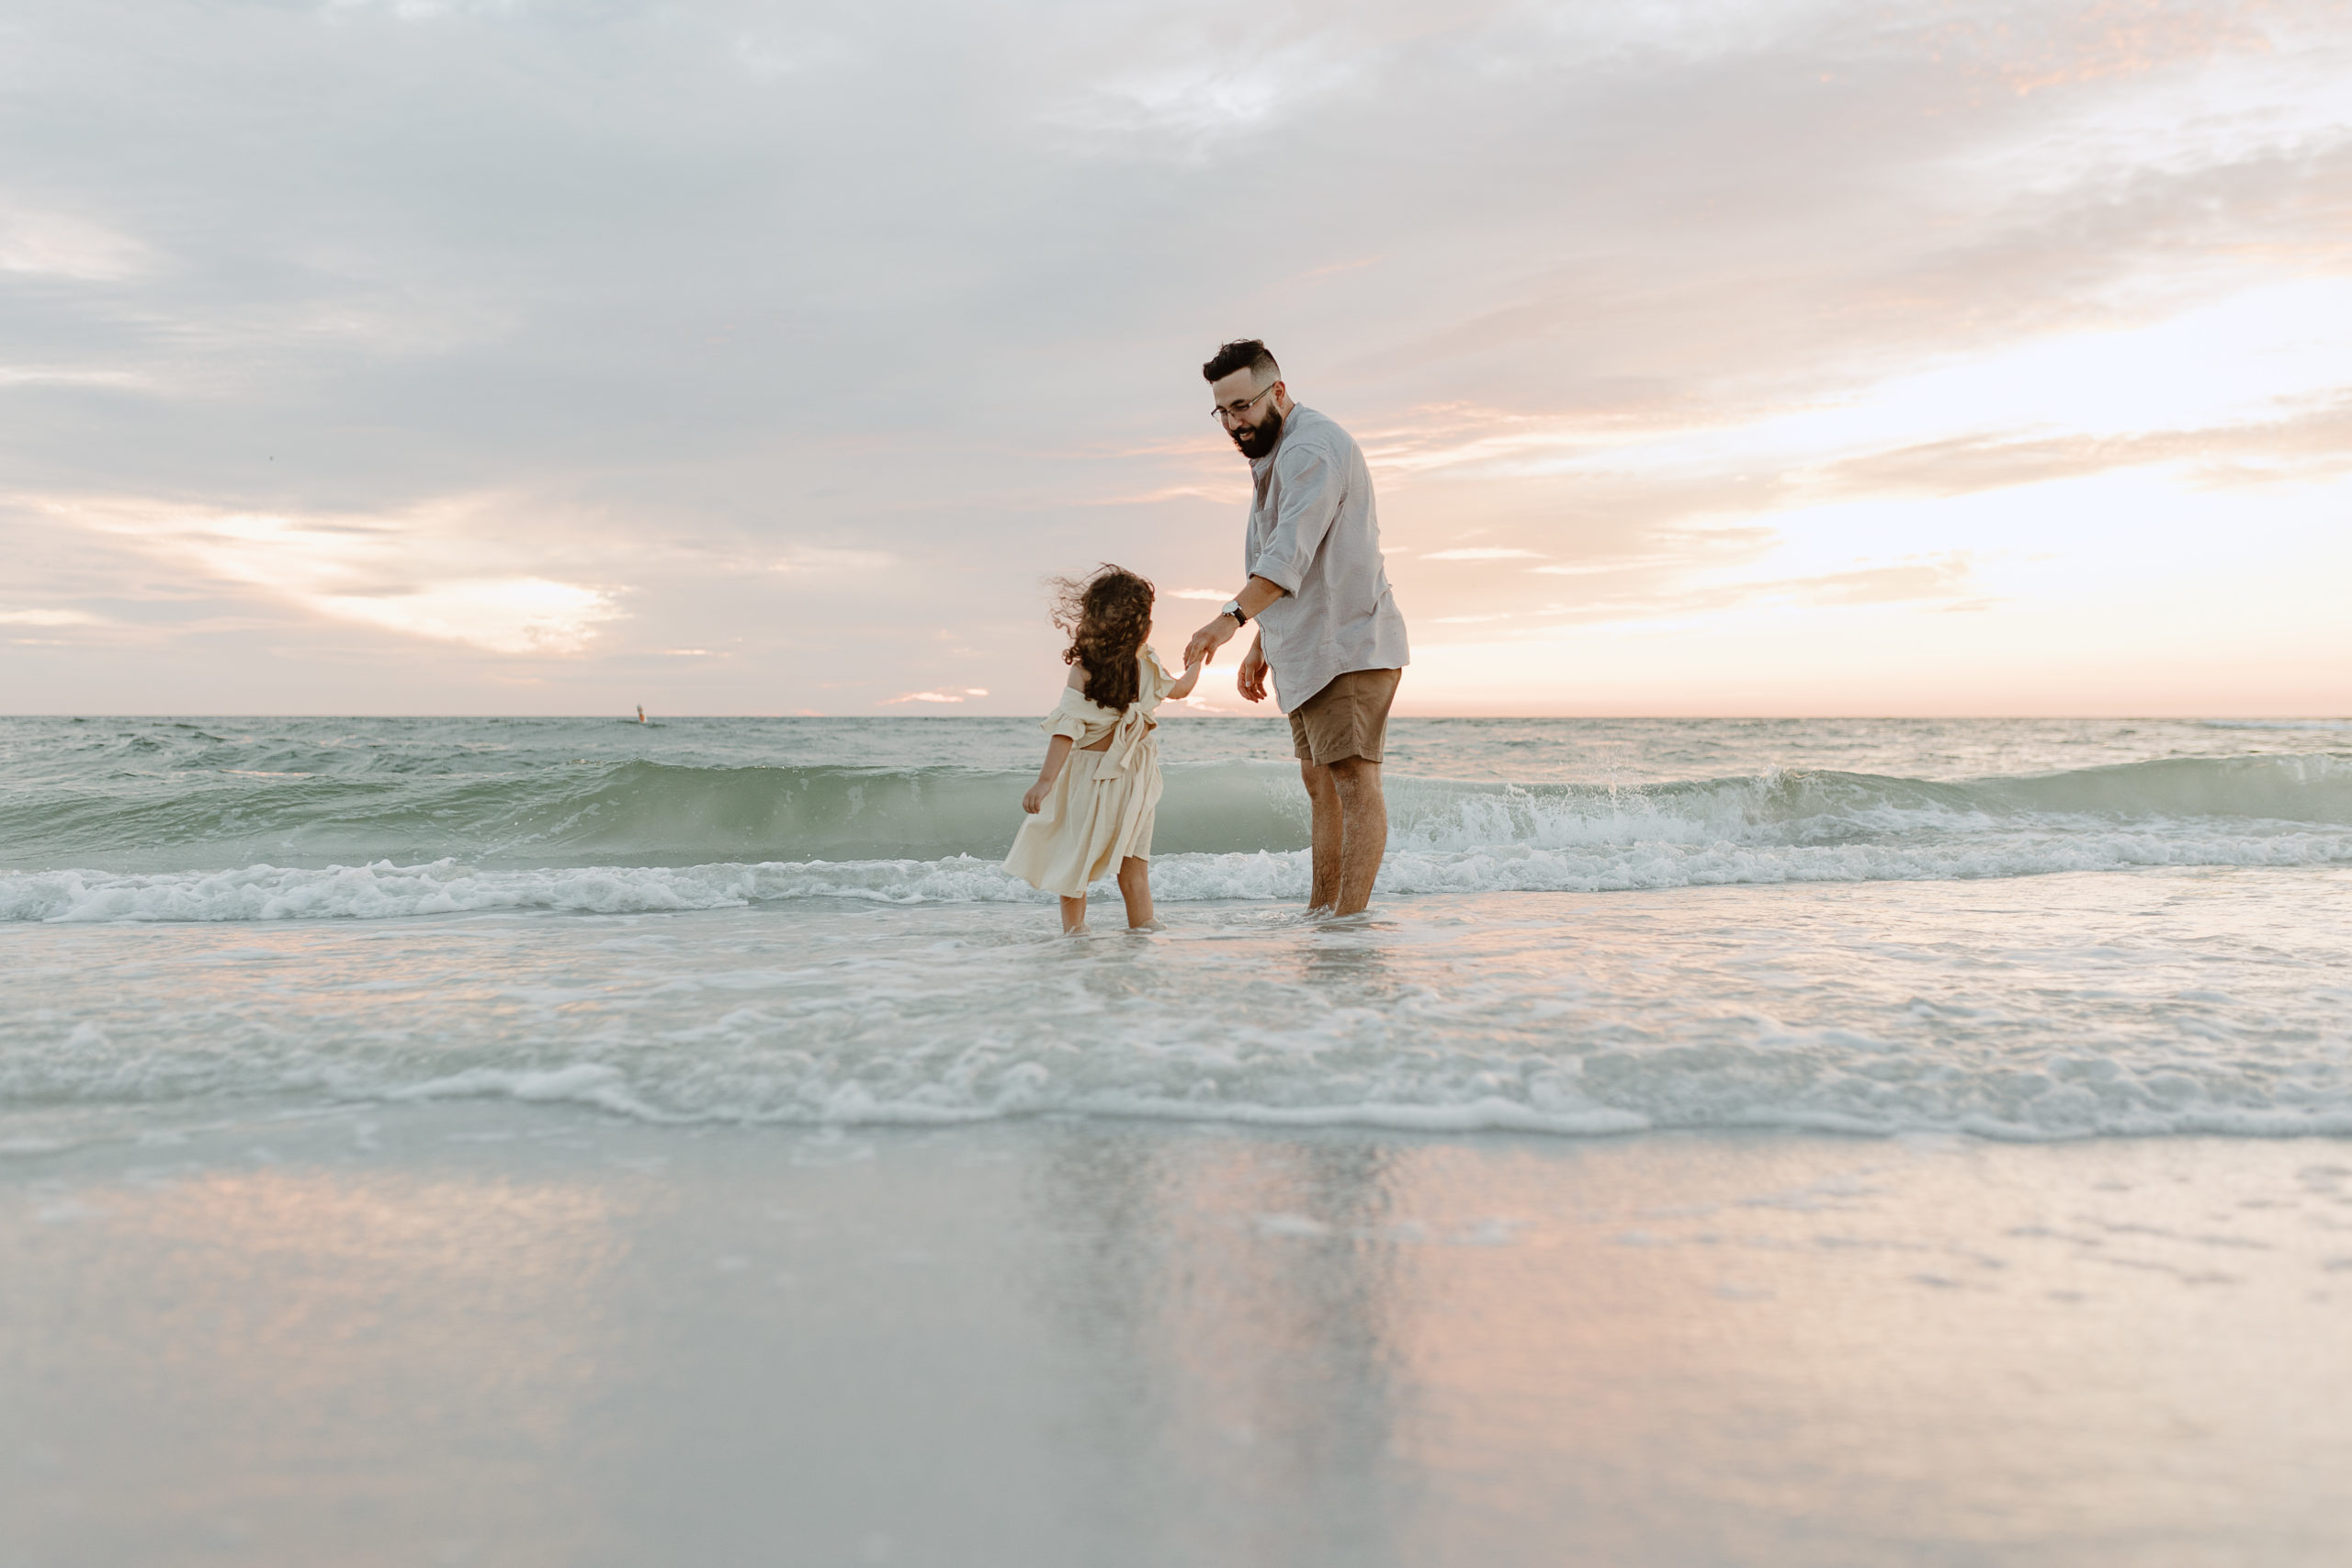 Sunset beach photography with father and daughter by Michelle Medina Photography.